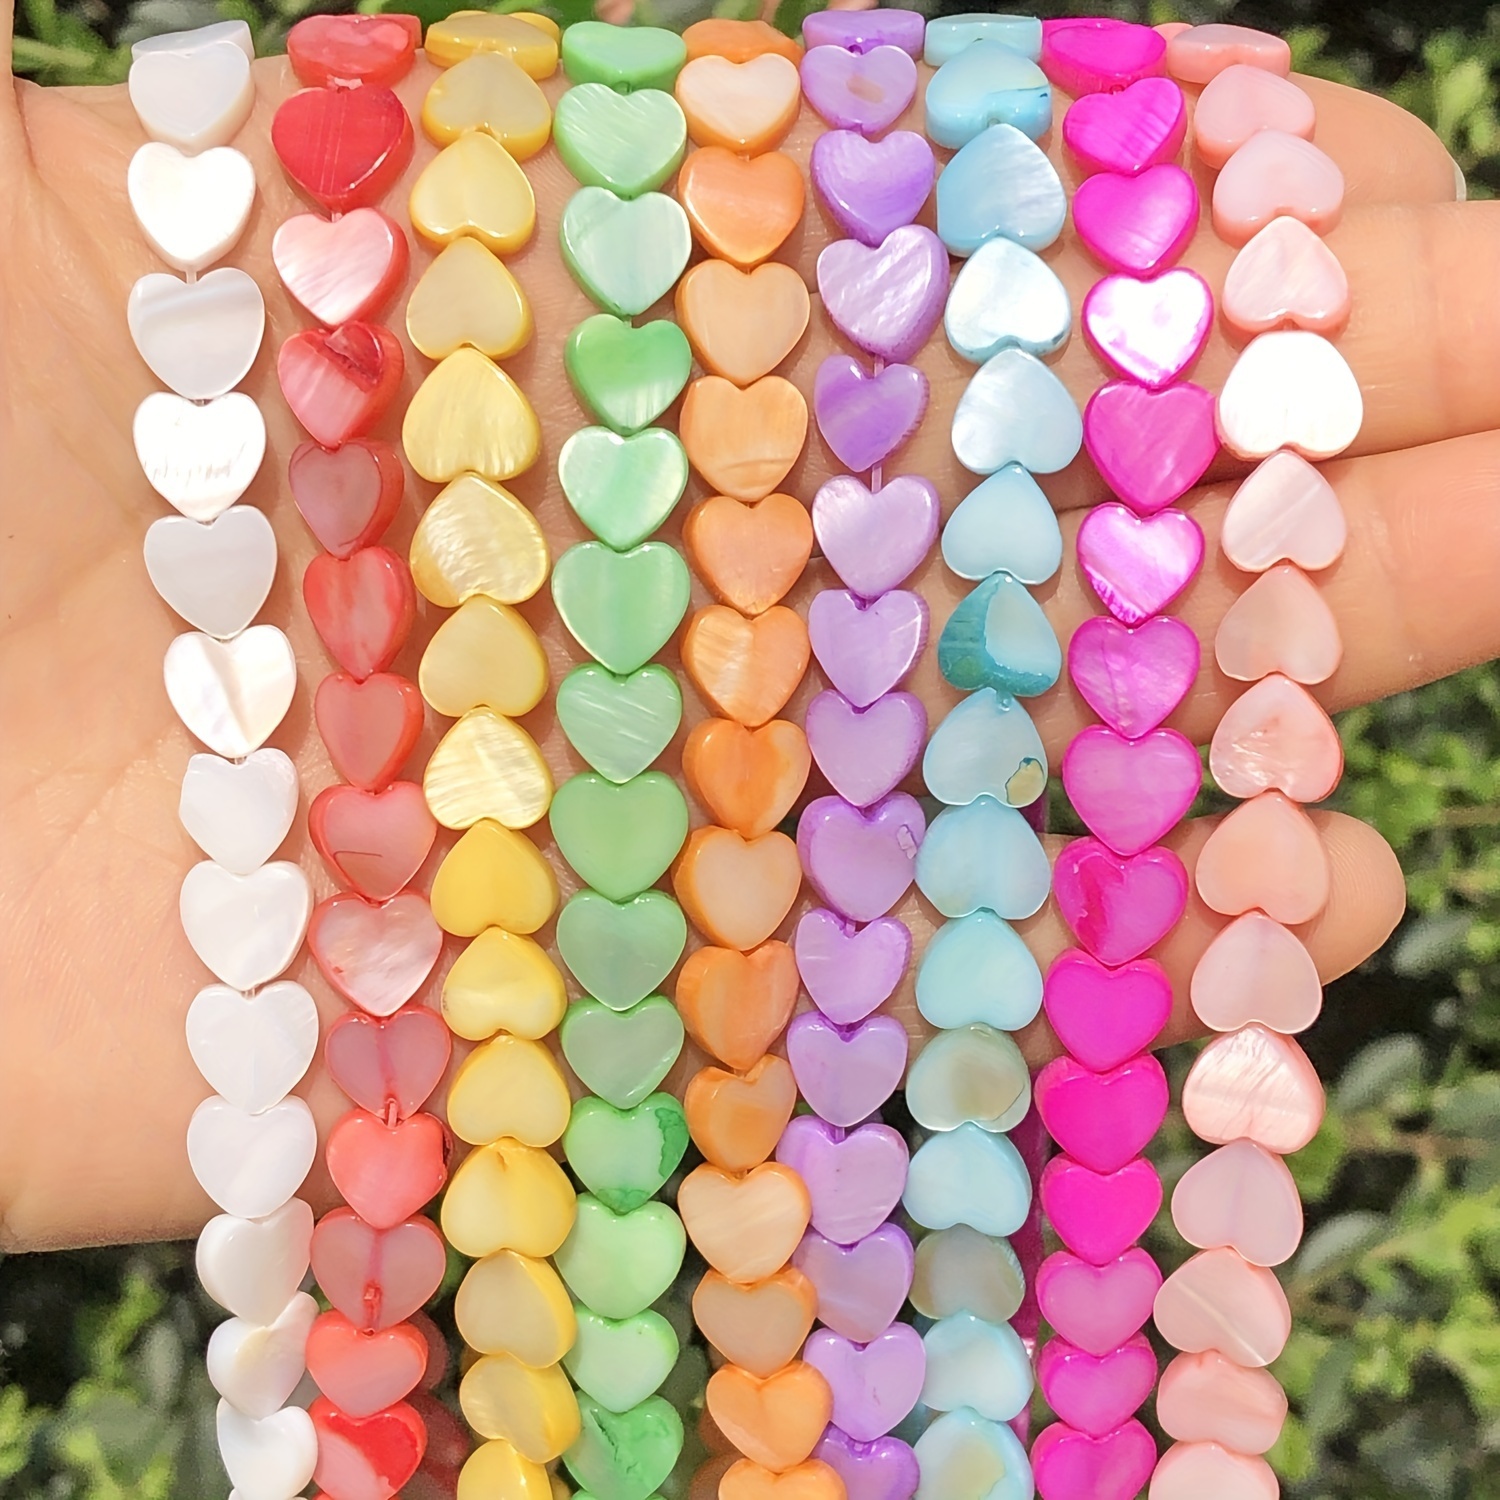 

50pcs 0.314" Candy Colors Small Stone Love Heart Shape Beads Freshwater Shell Beads For Jewelry Making Diy Bracelet Earrings Accessories